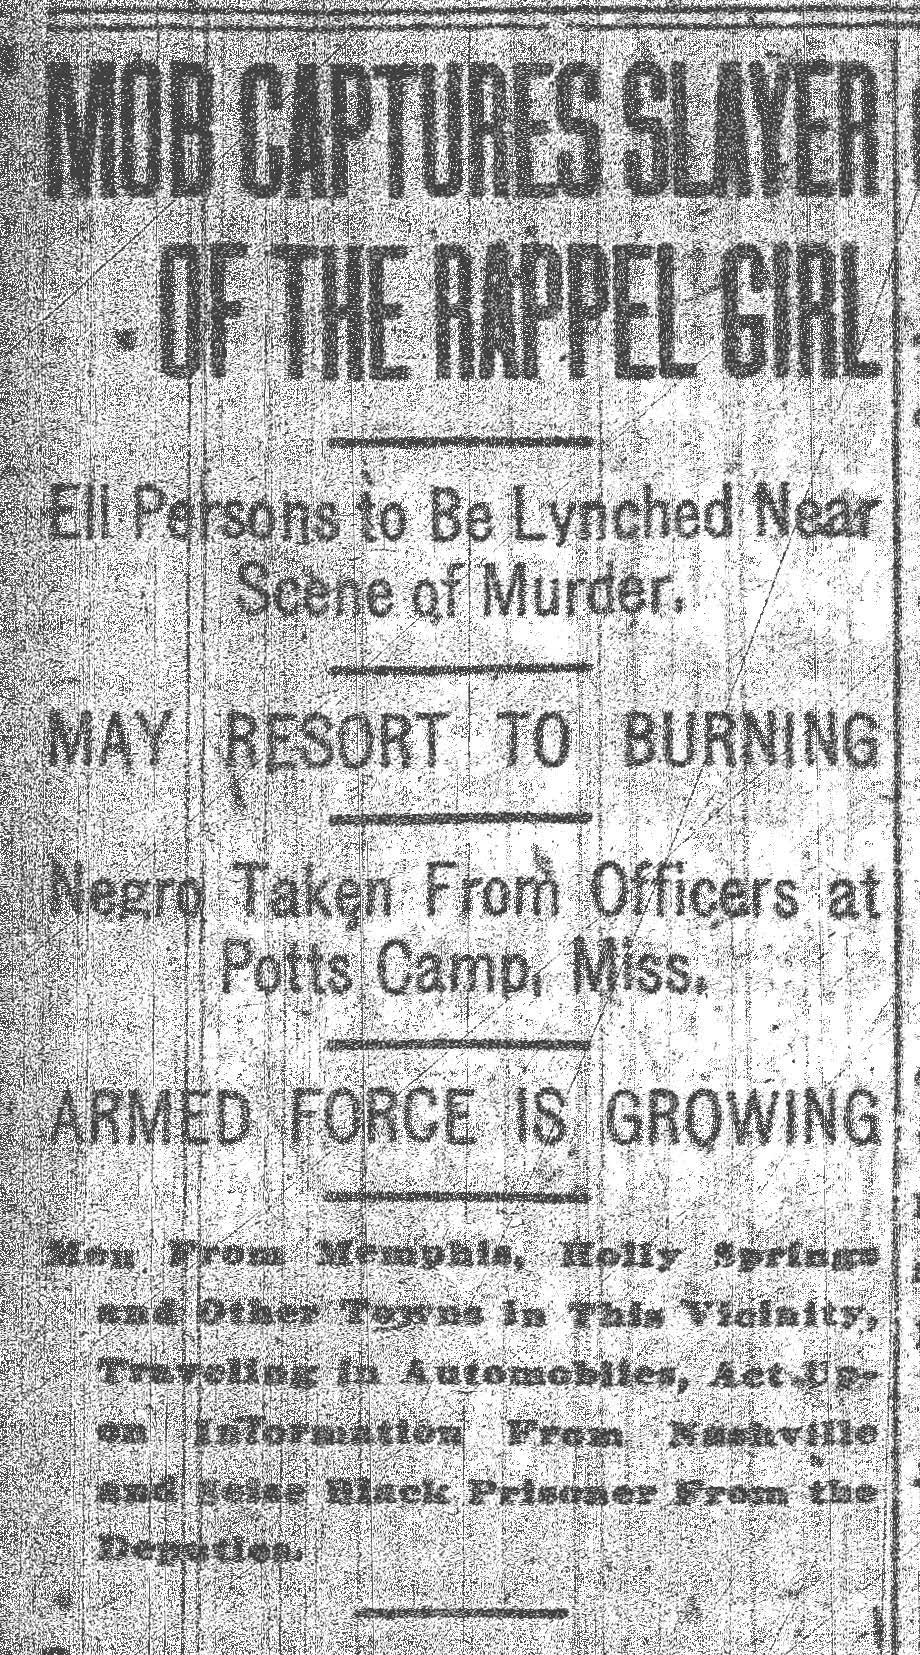 Commercial Appeal, 5/22/1917